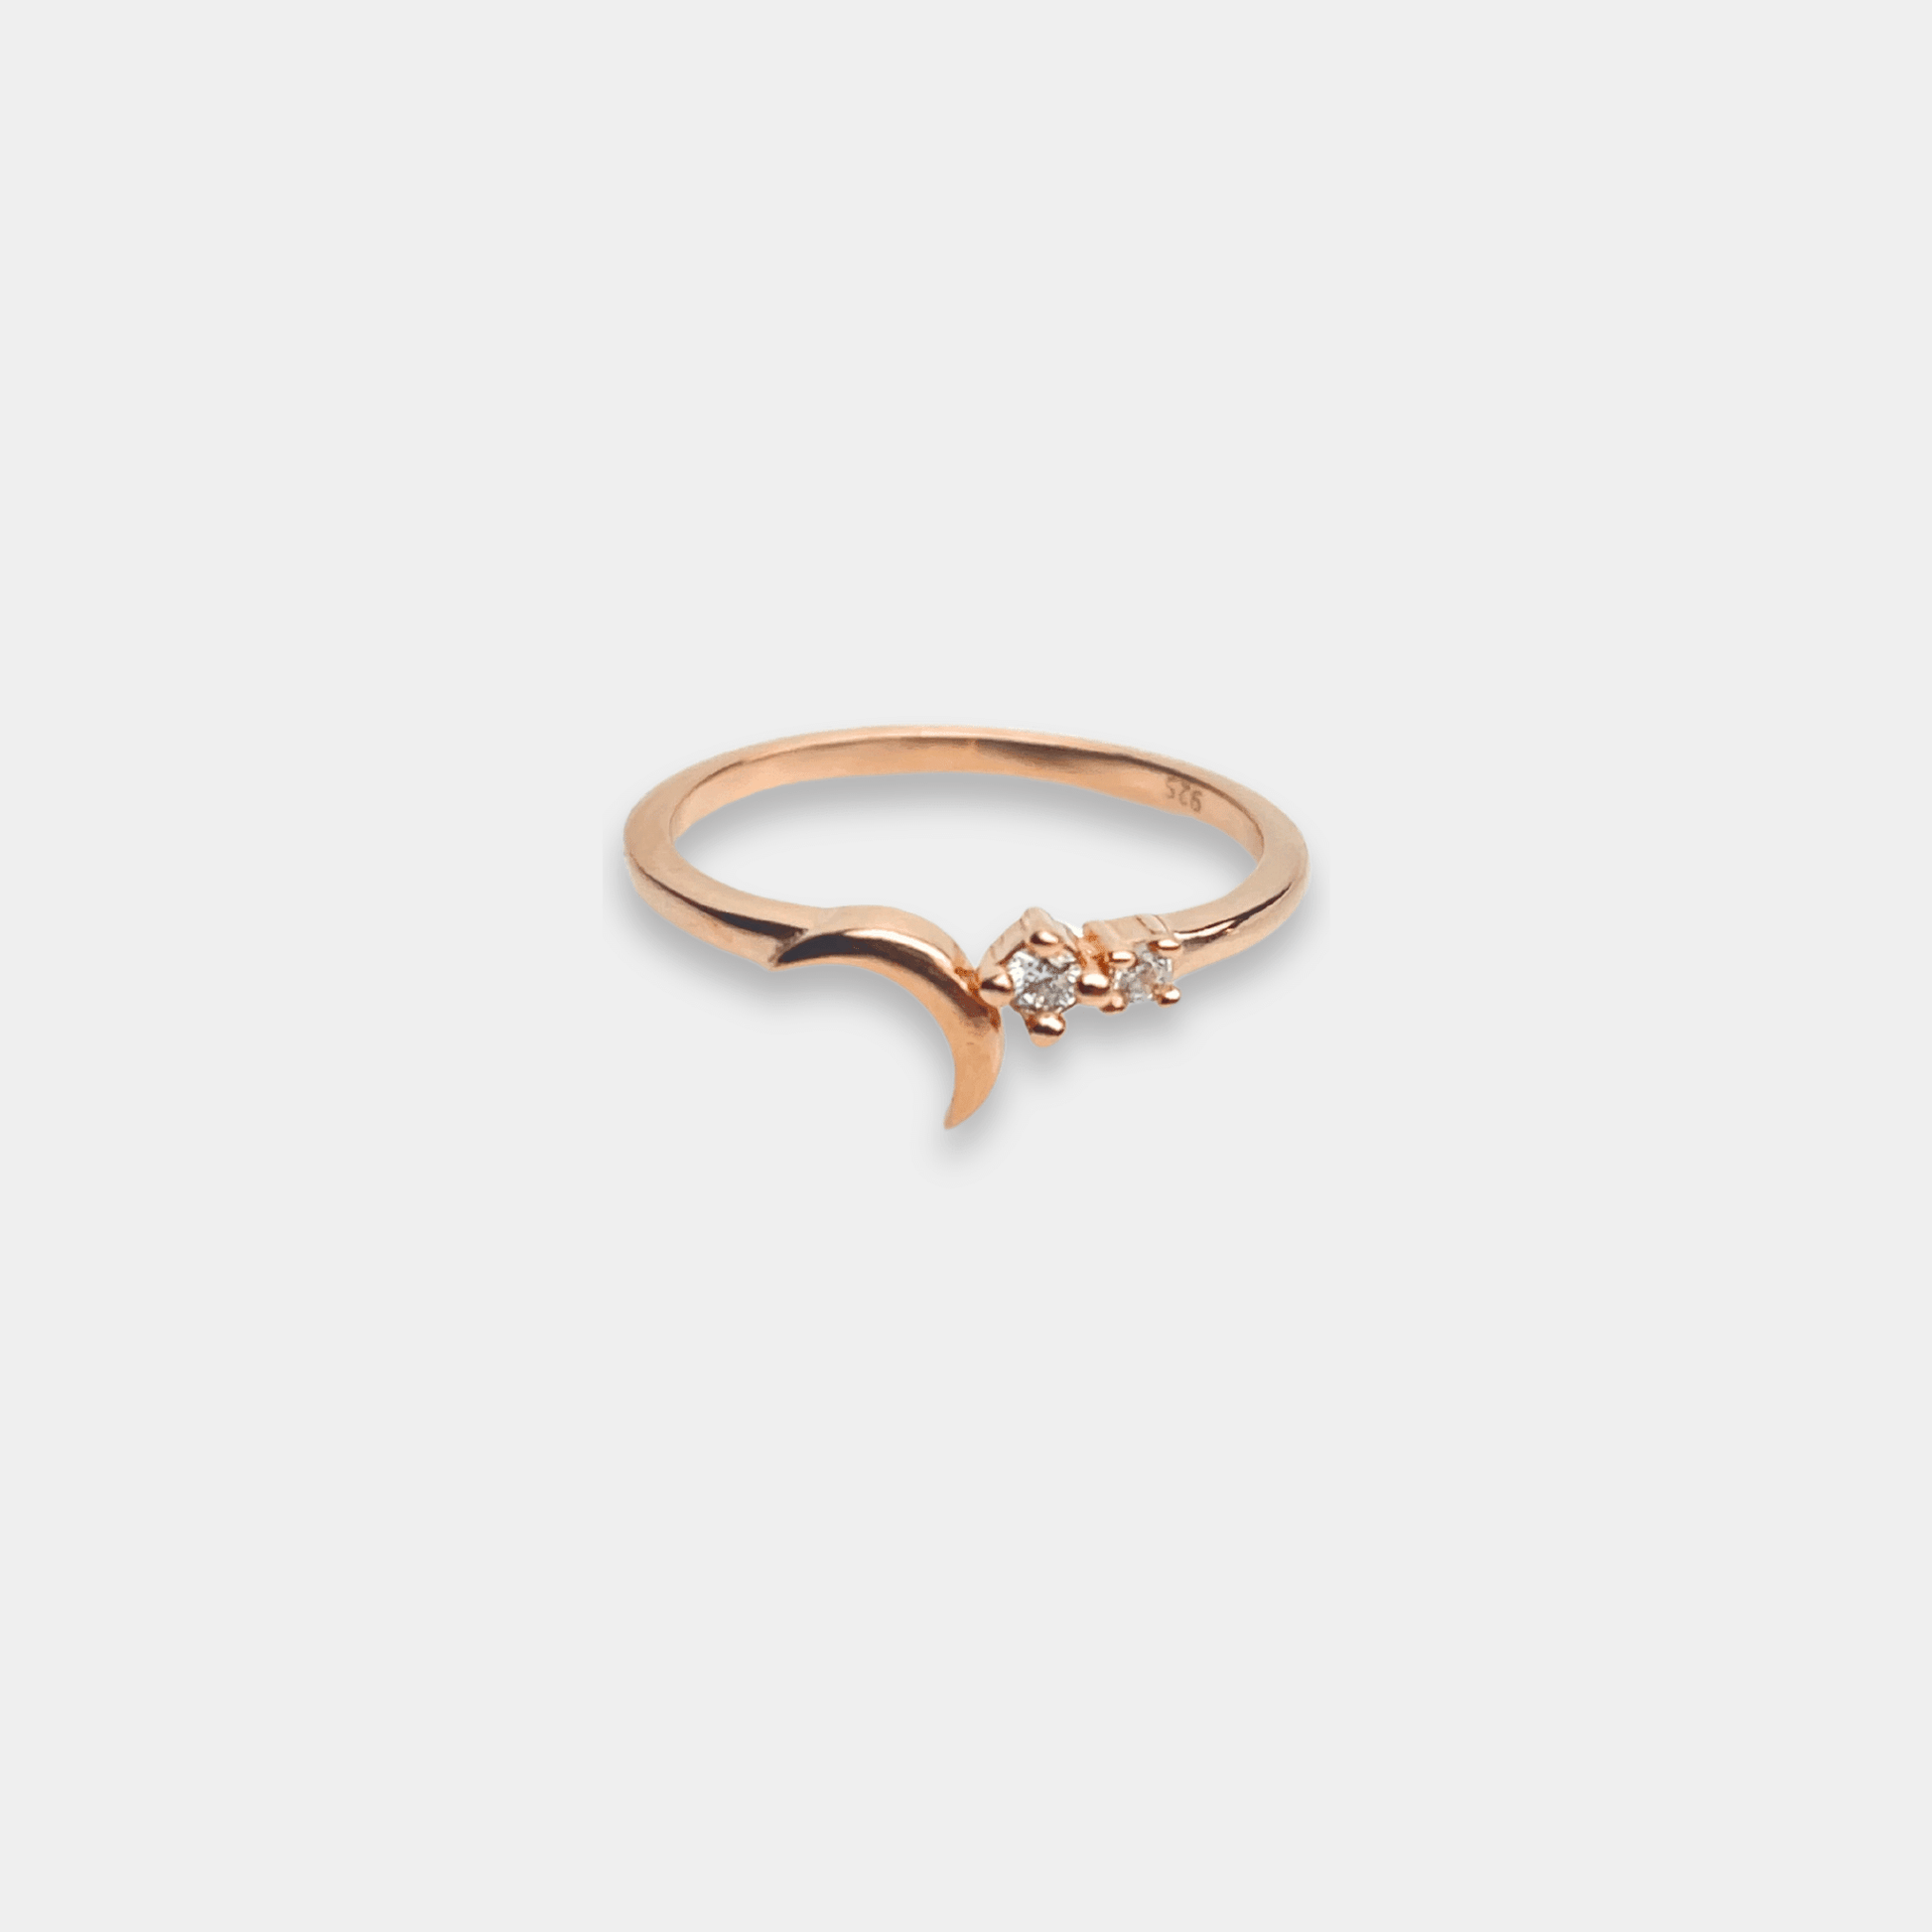 A stunning sterling silver ring with a crescent and star design, shining in beautiful rose gold.